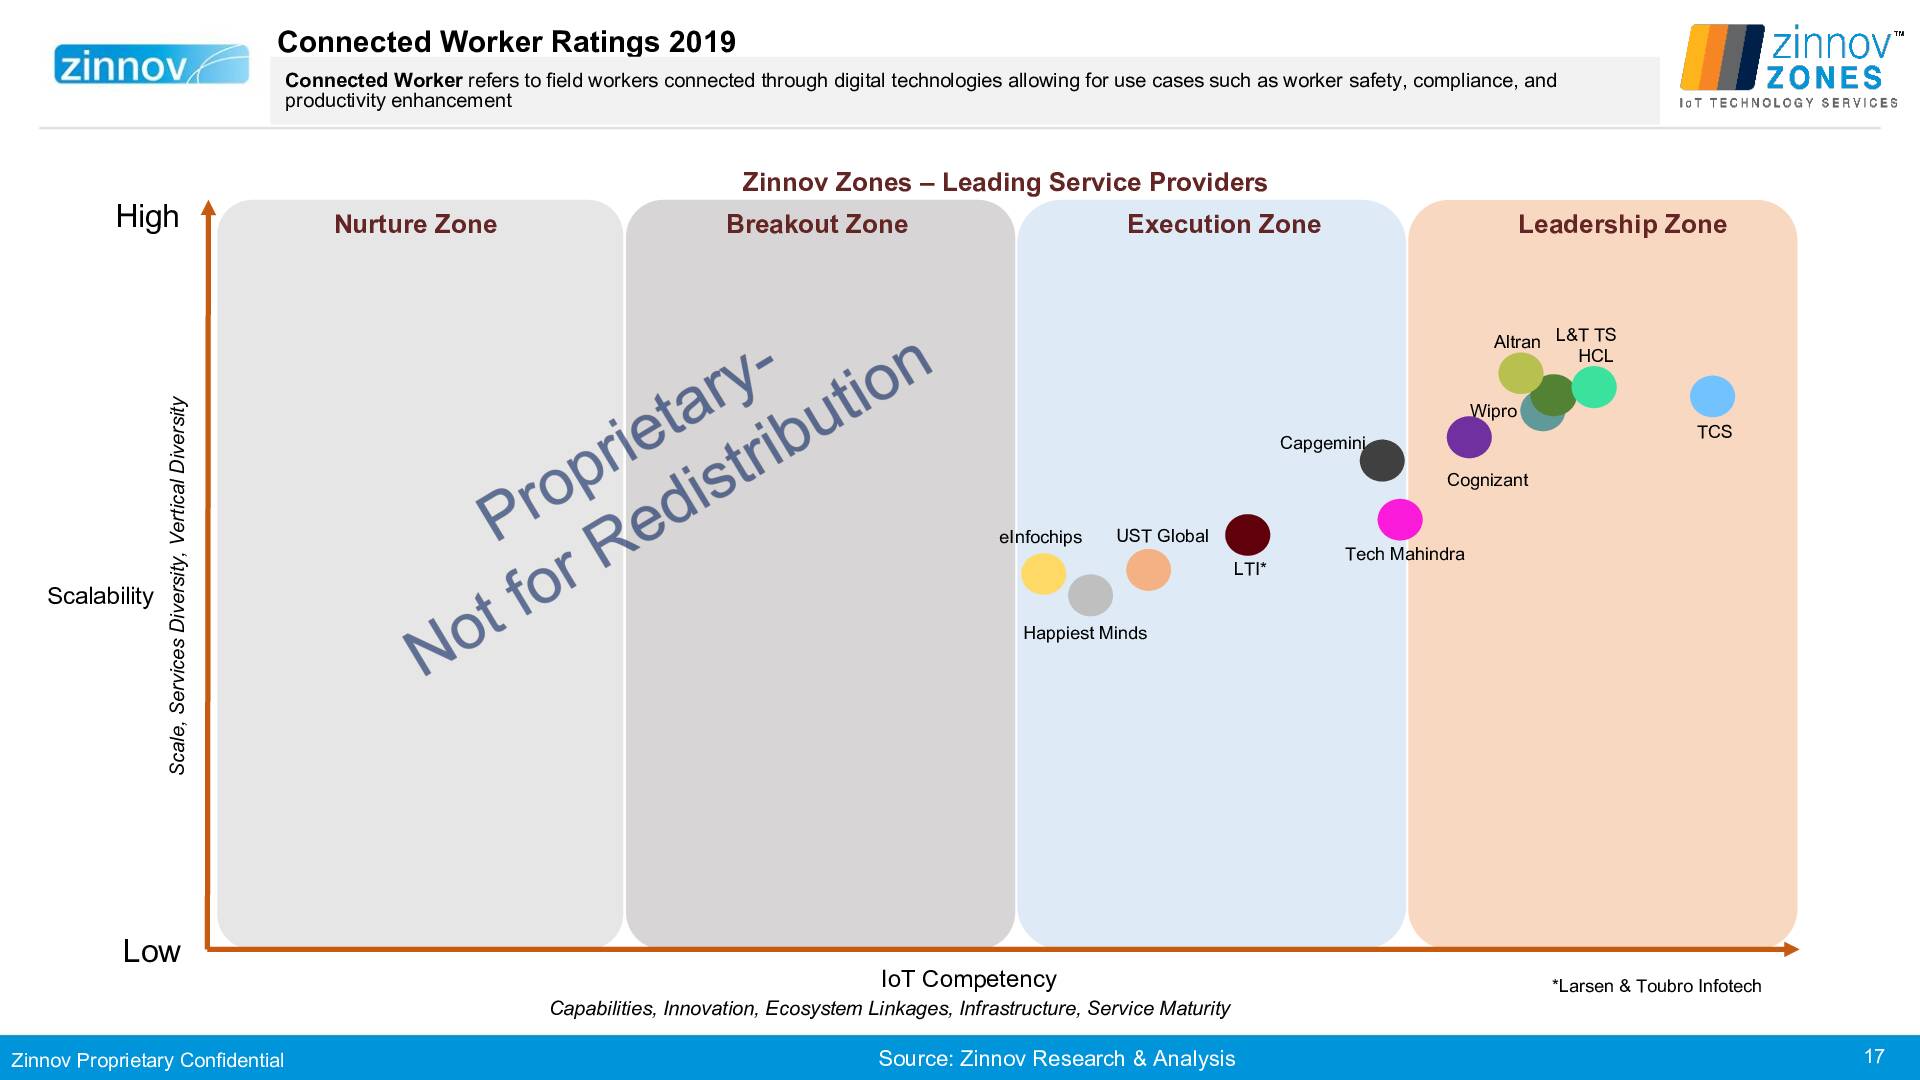 Zinnov Zones Iot Technology Services 2019 Ratings17